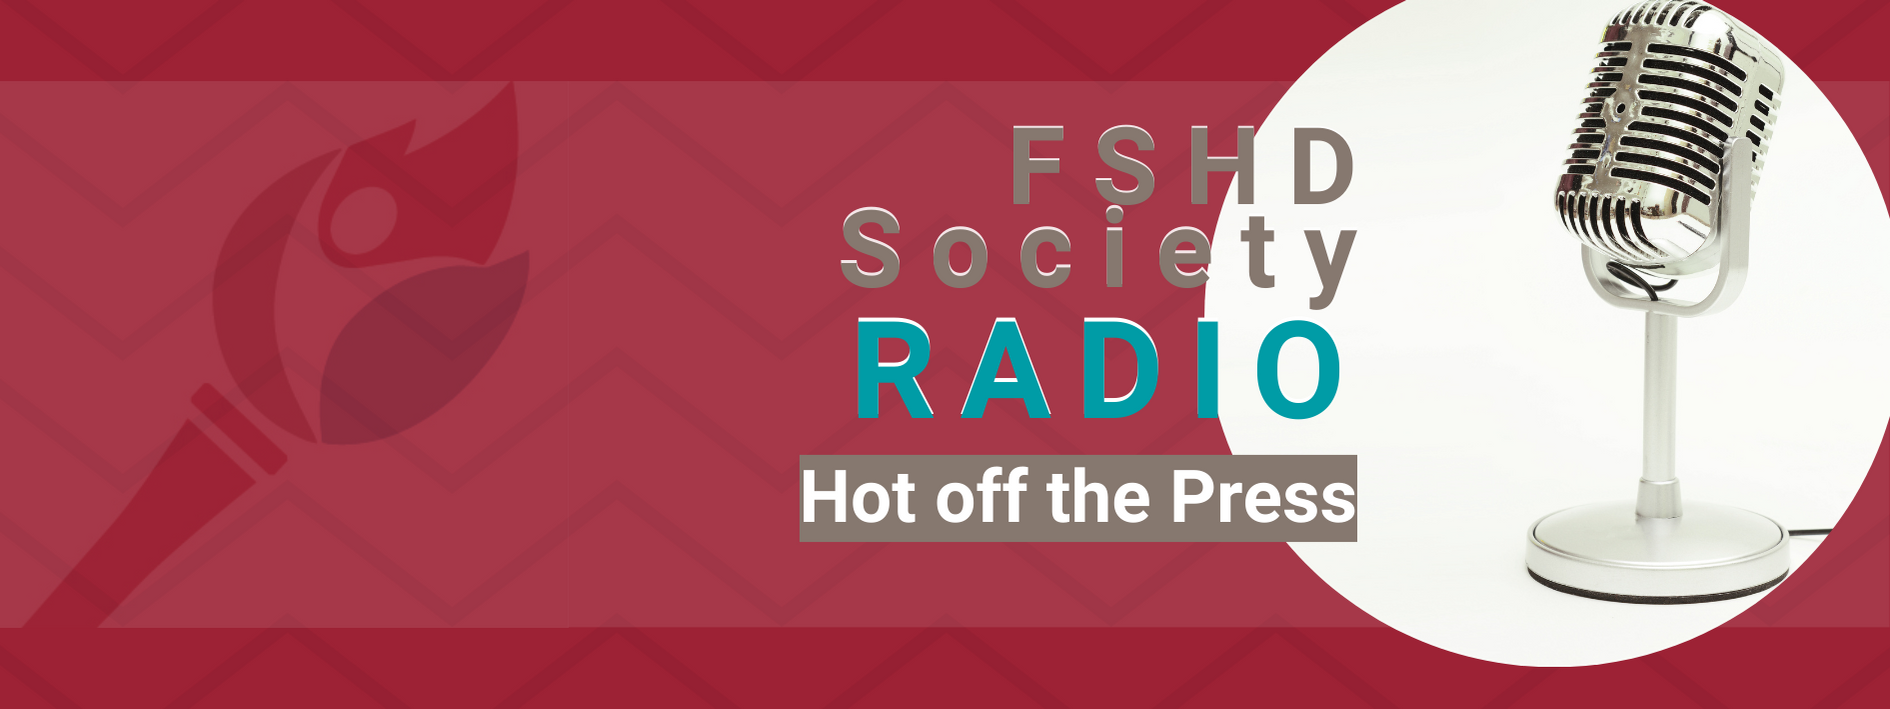 FSHD Radio Show Hot off the Press logo with microphone